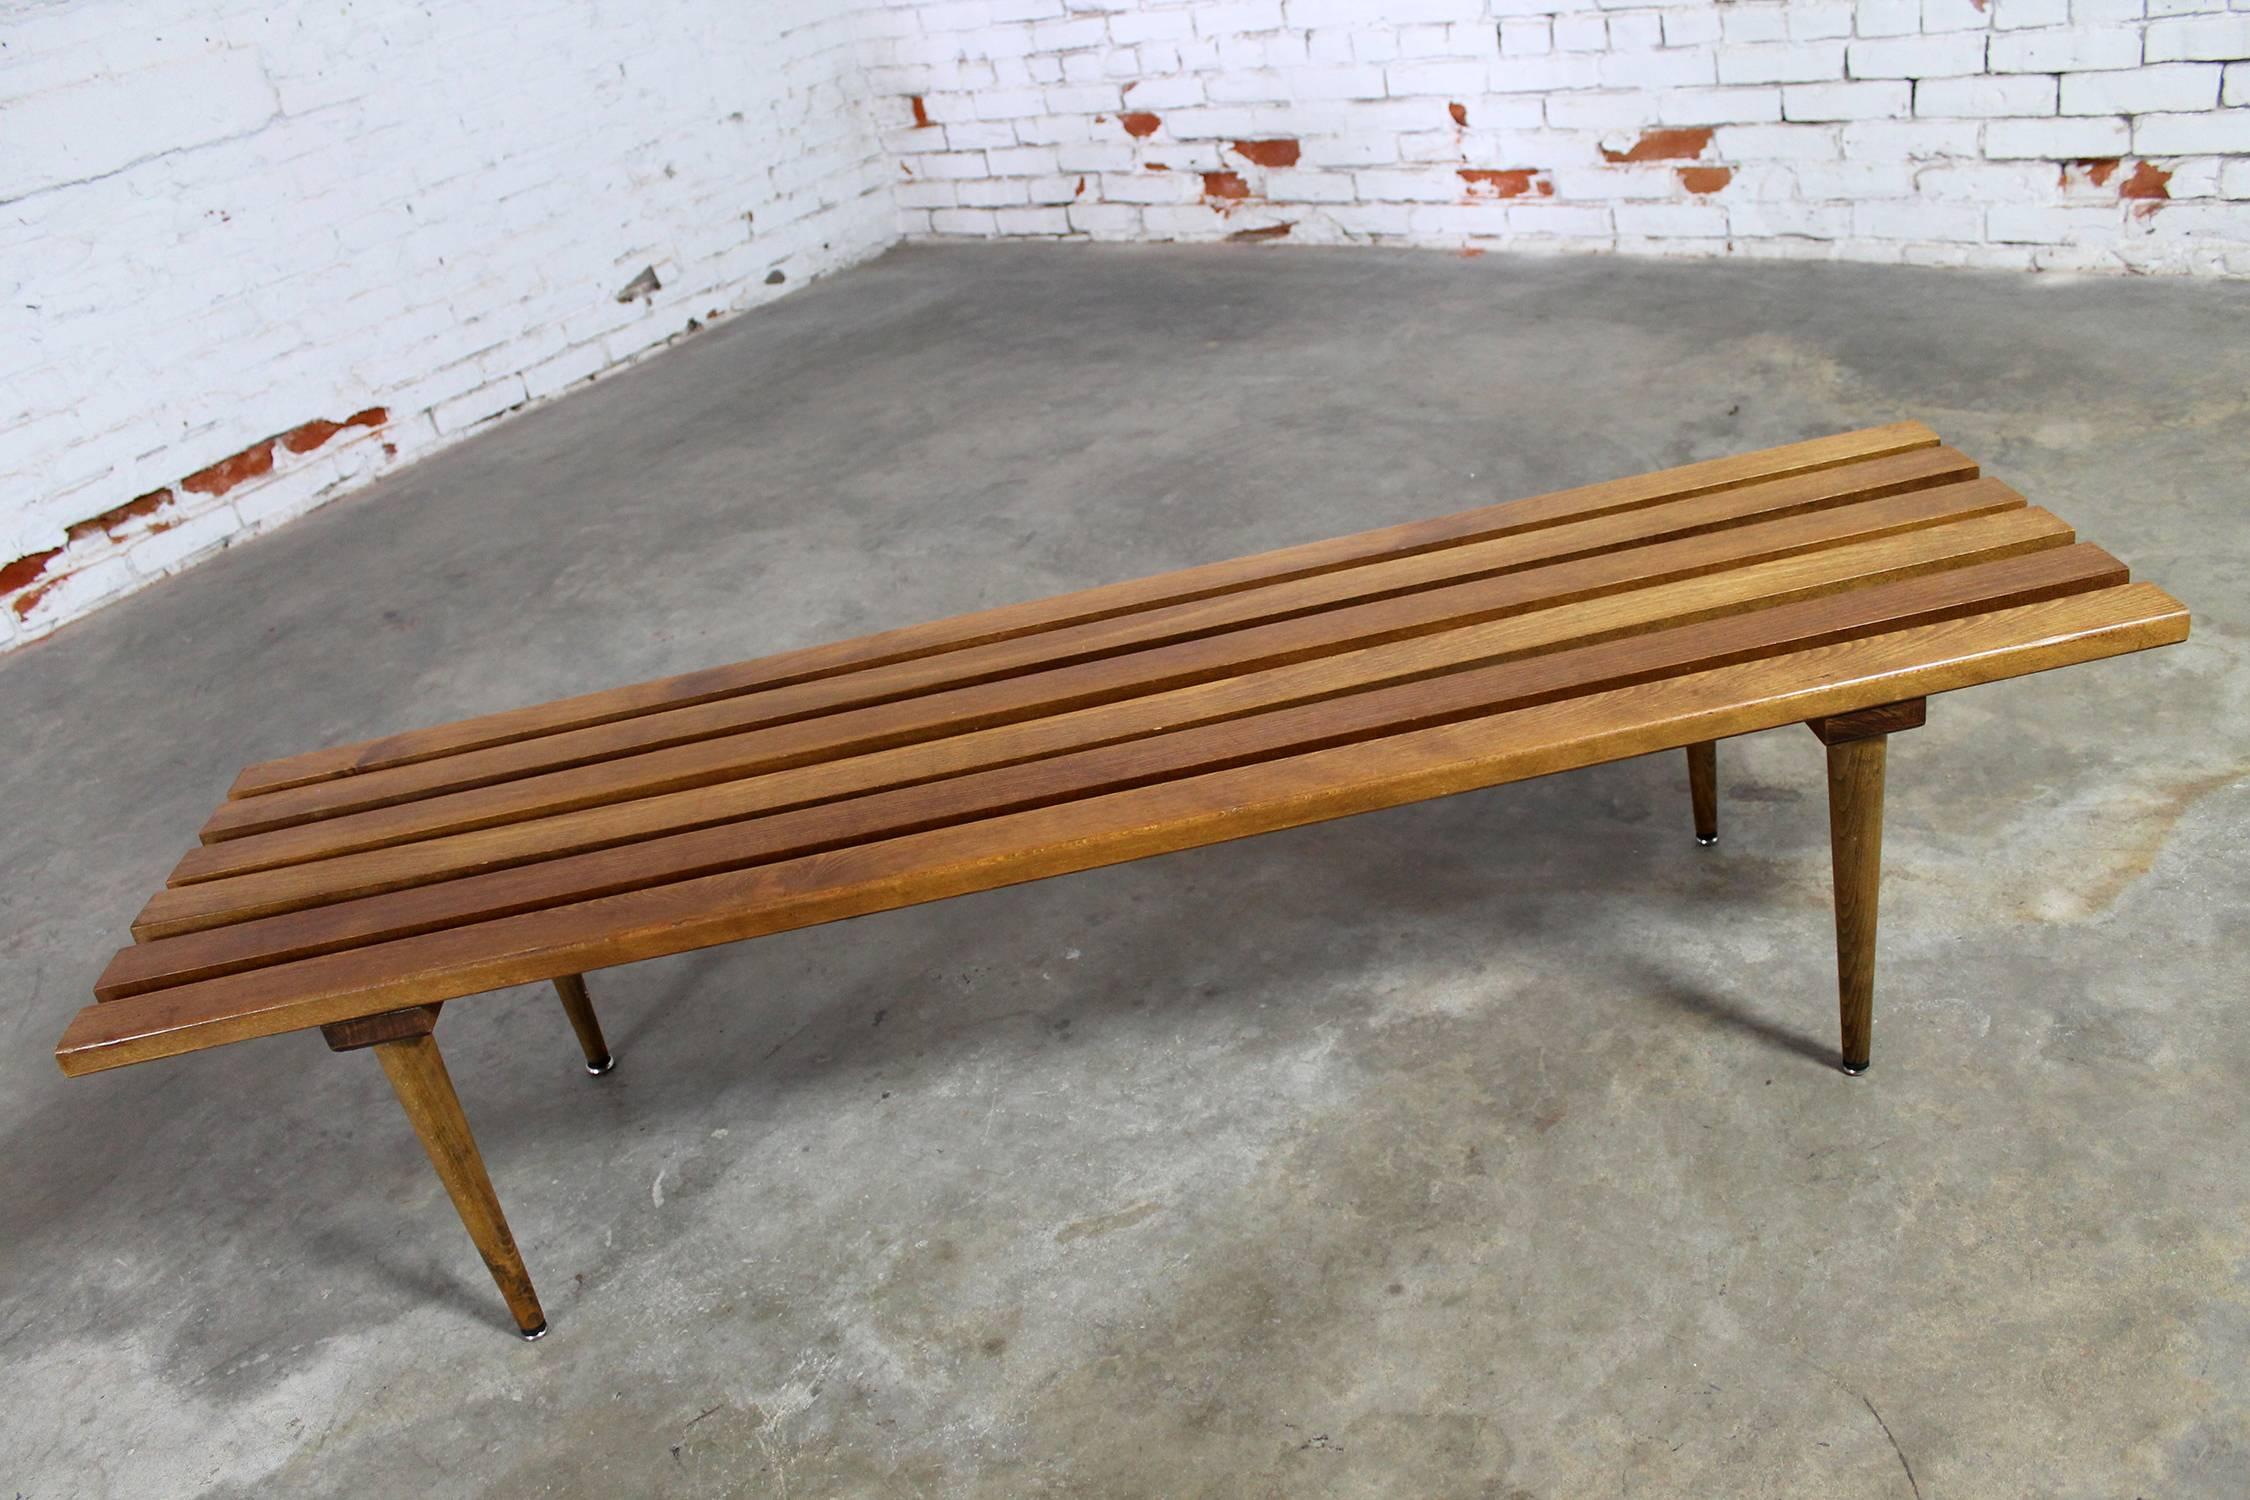 Iconic Mid-Century Modern slatted bench or coffee table from Yugoslavia. In wonderful vintage condition with the normal nicks and dings of use but nothing major. There is also a small red possibly ink mark, circa 1960s.

This fabulous slatted